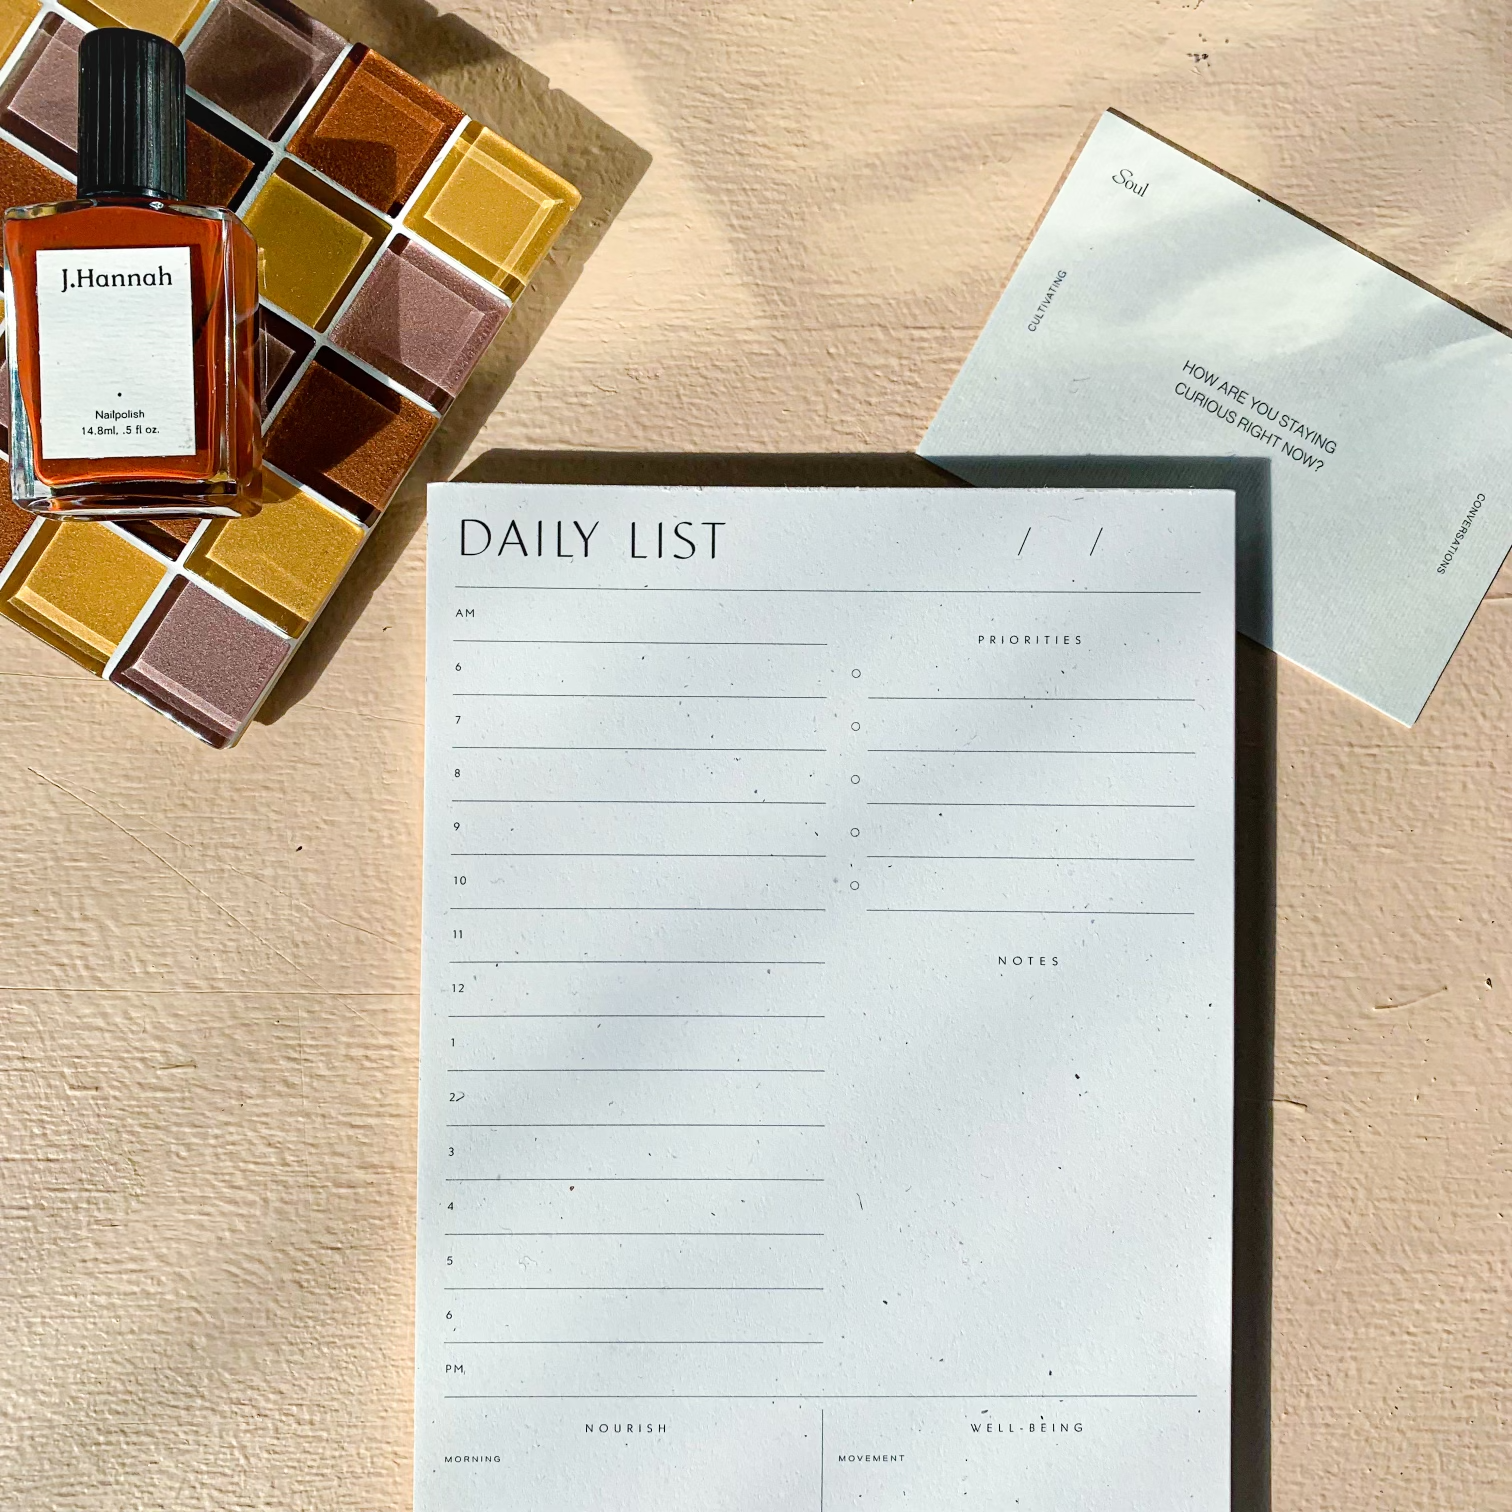 Wilde House Paper Daily List pad. Shows hourly segments and a section for notes, movement, and self care.